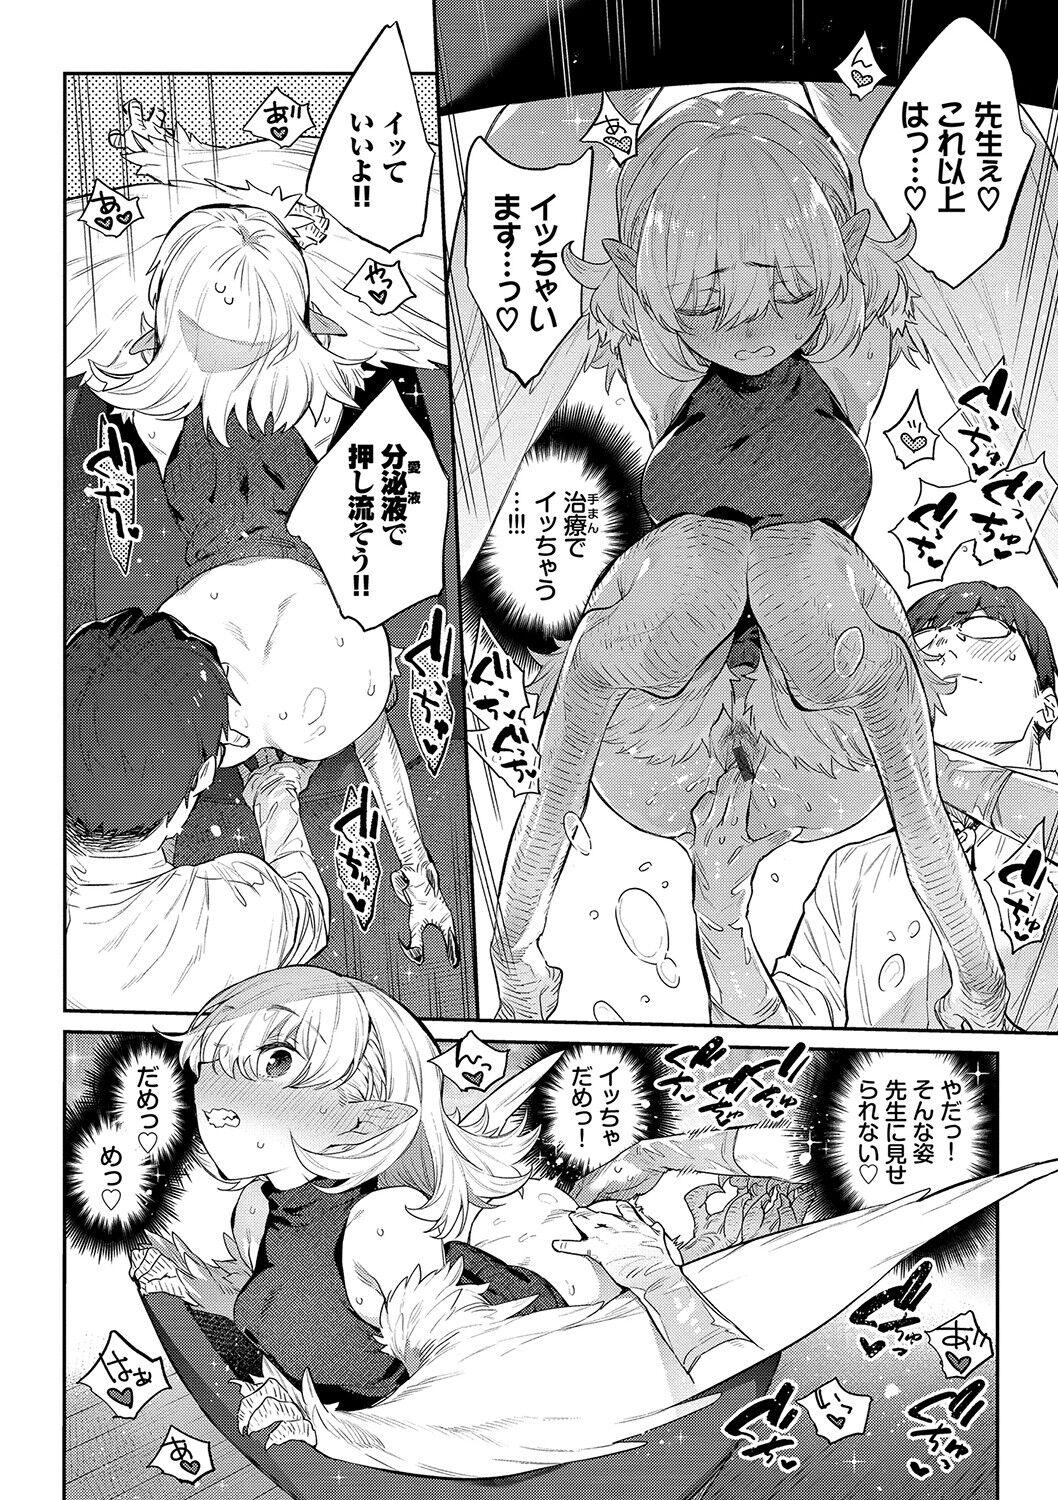 Ihou no Otome - Monster Girls in Another World 134